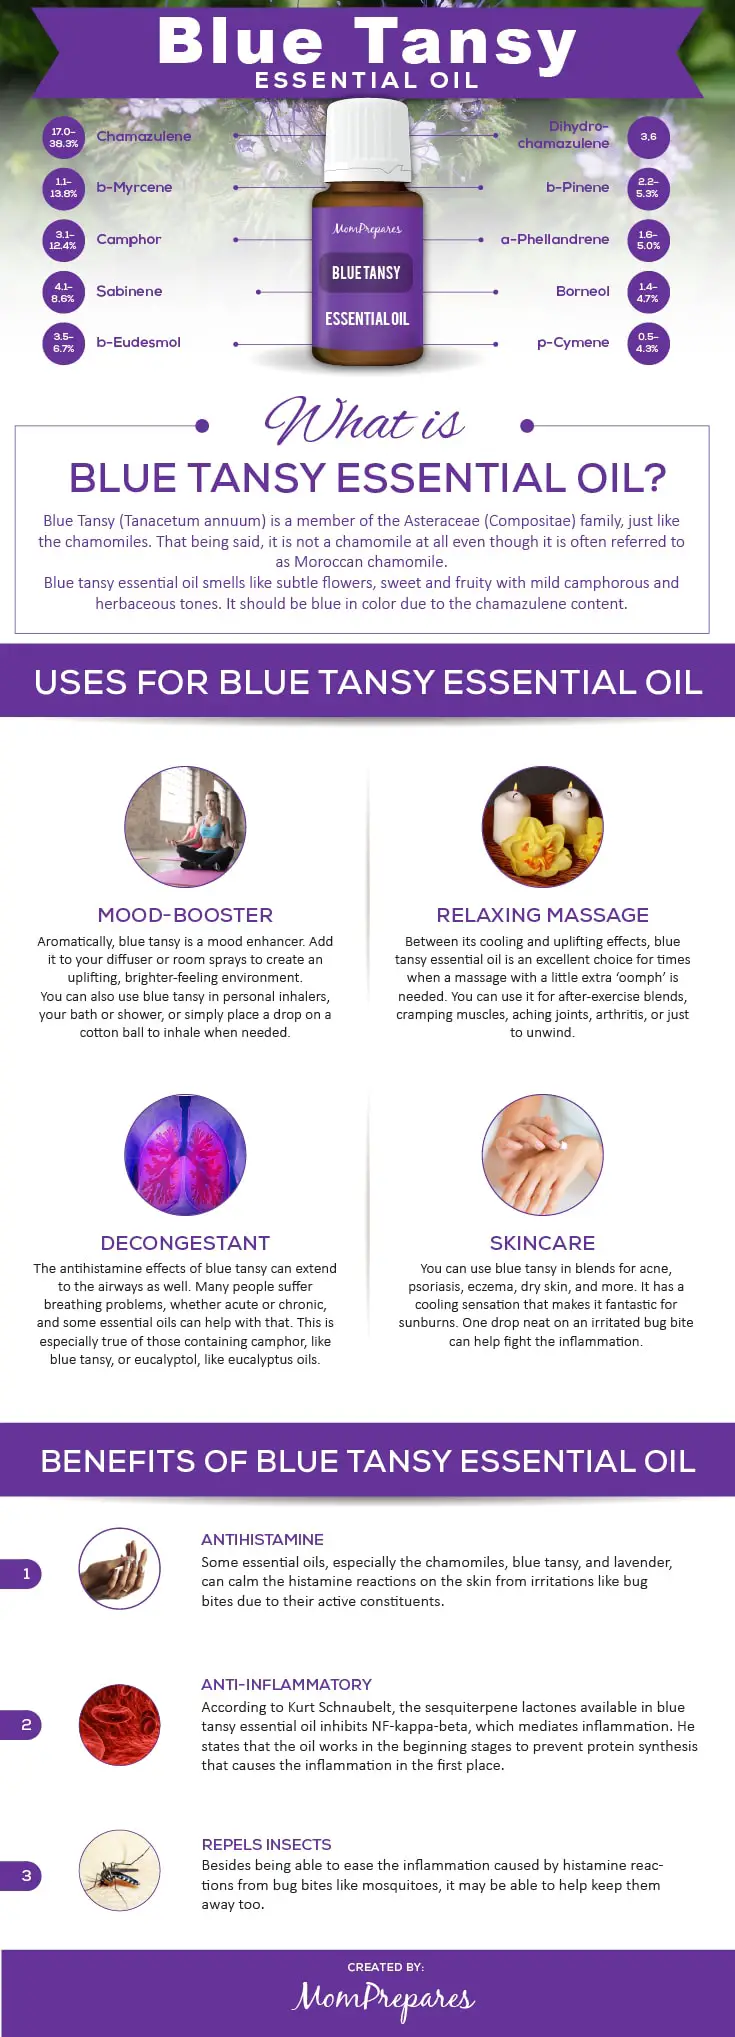 Blue Tansy infographic